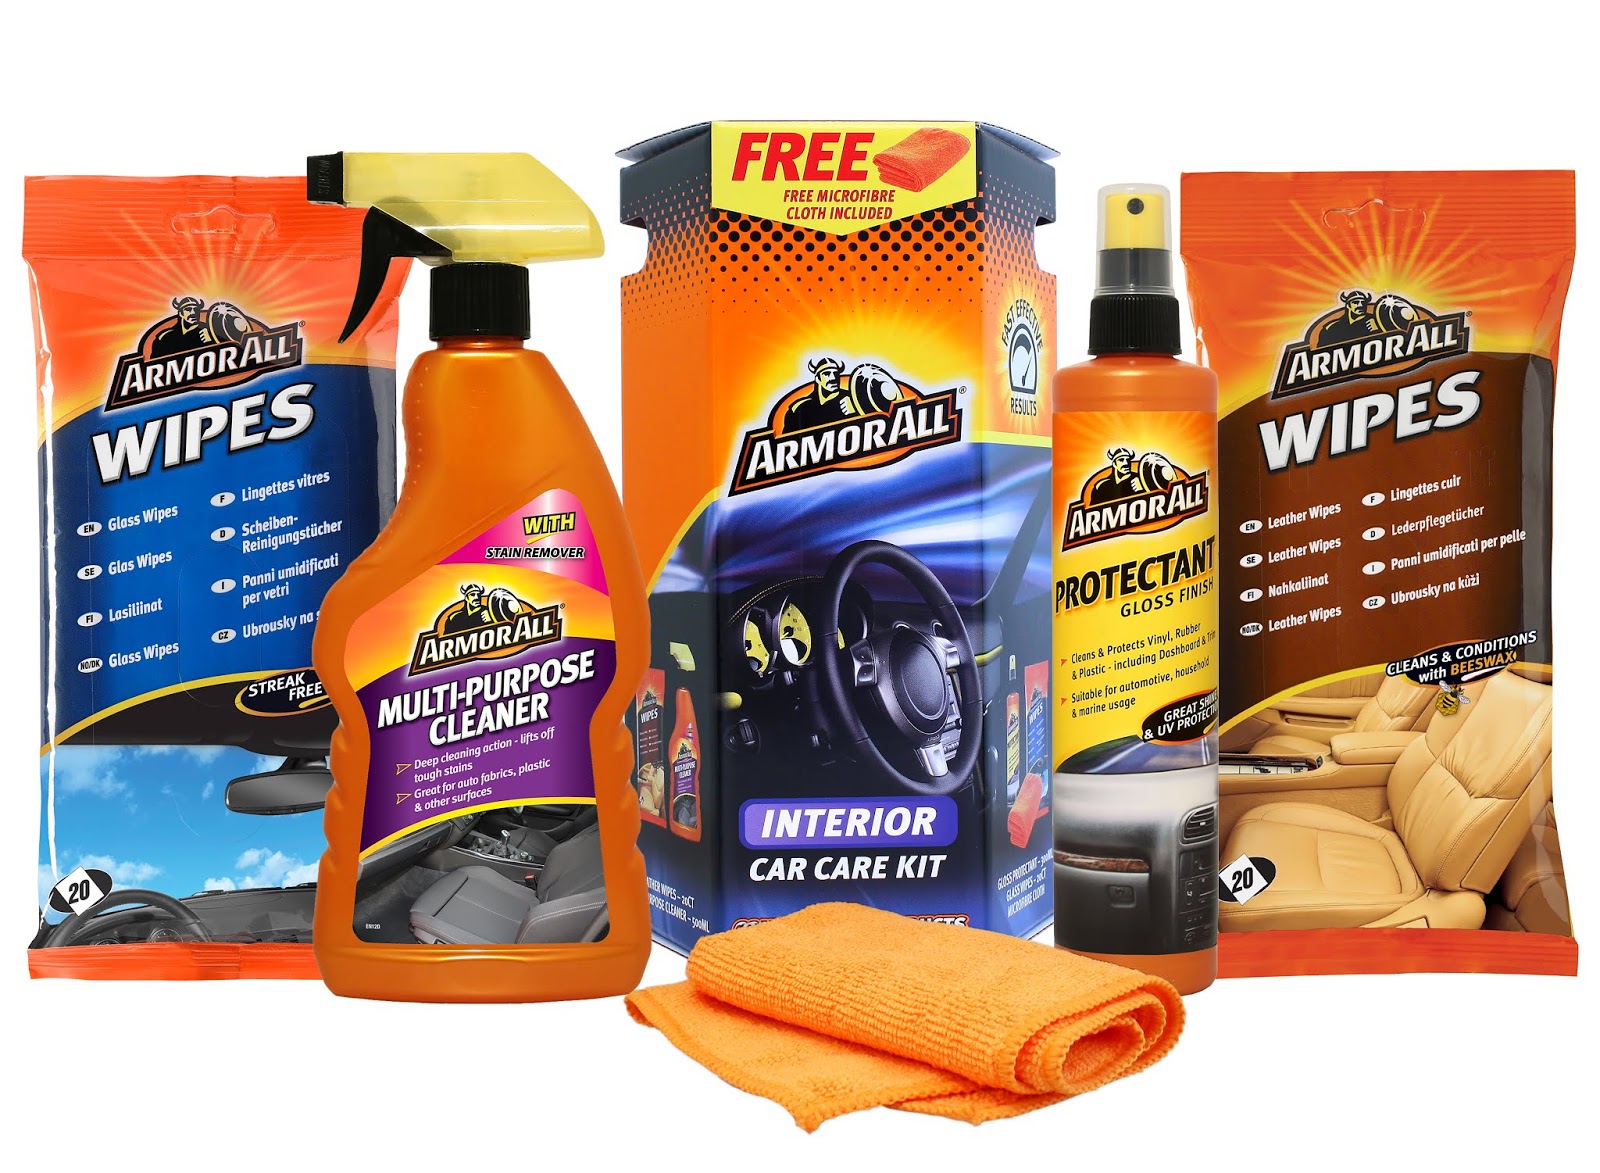 Us Two Plus You: Armor All Interior Car Cleaning Kit Giveaway